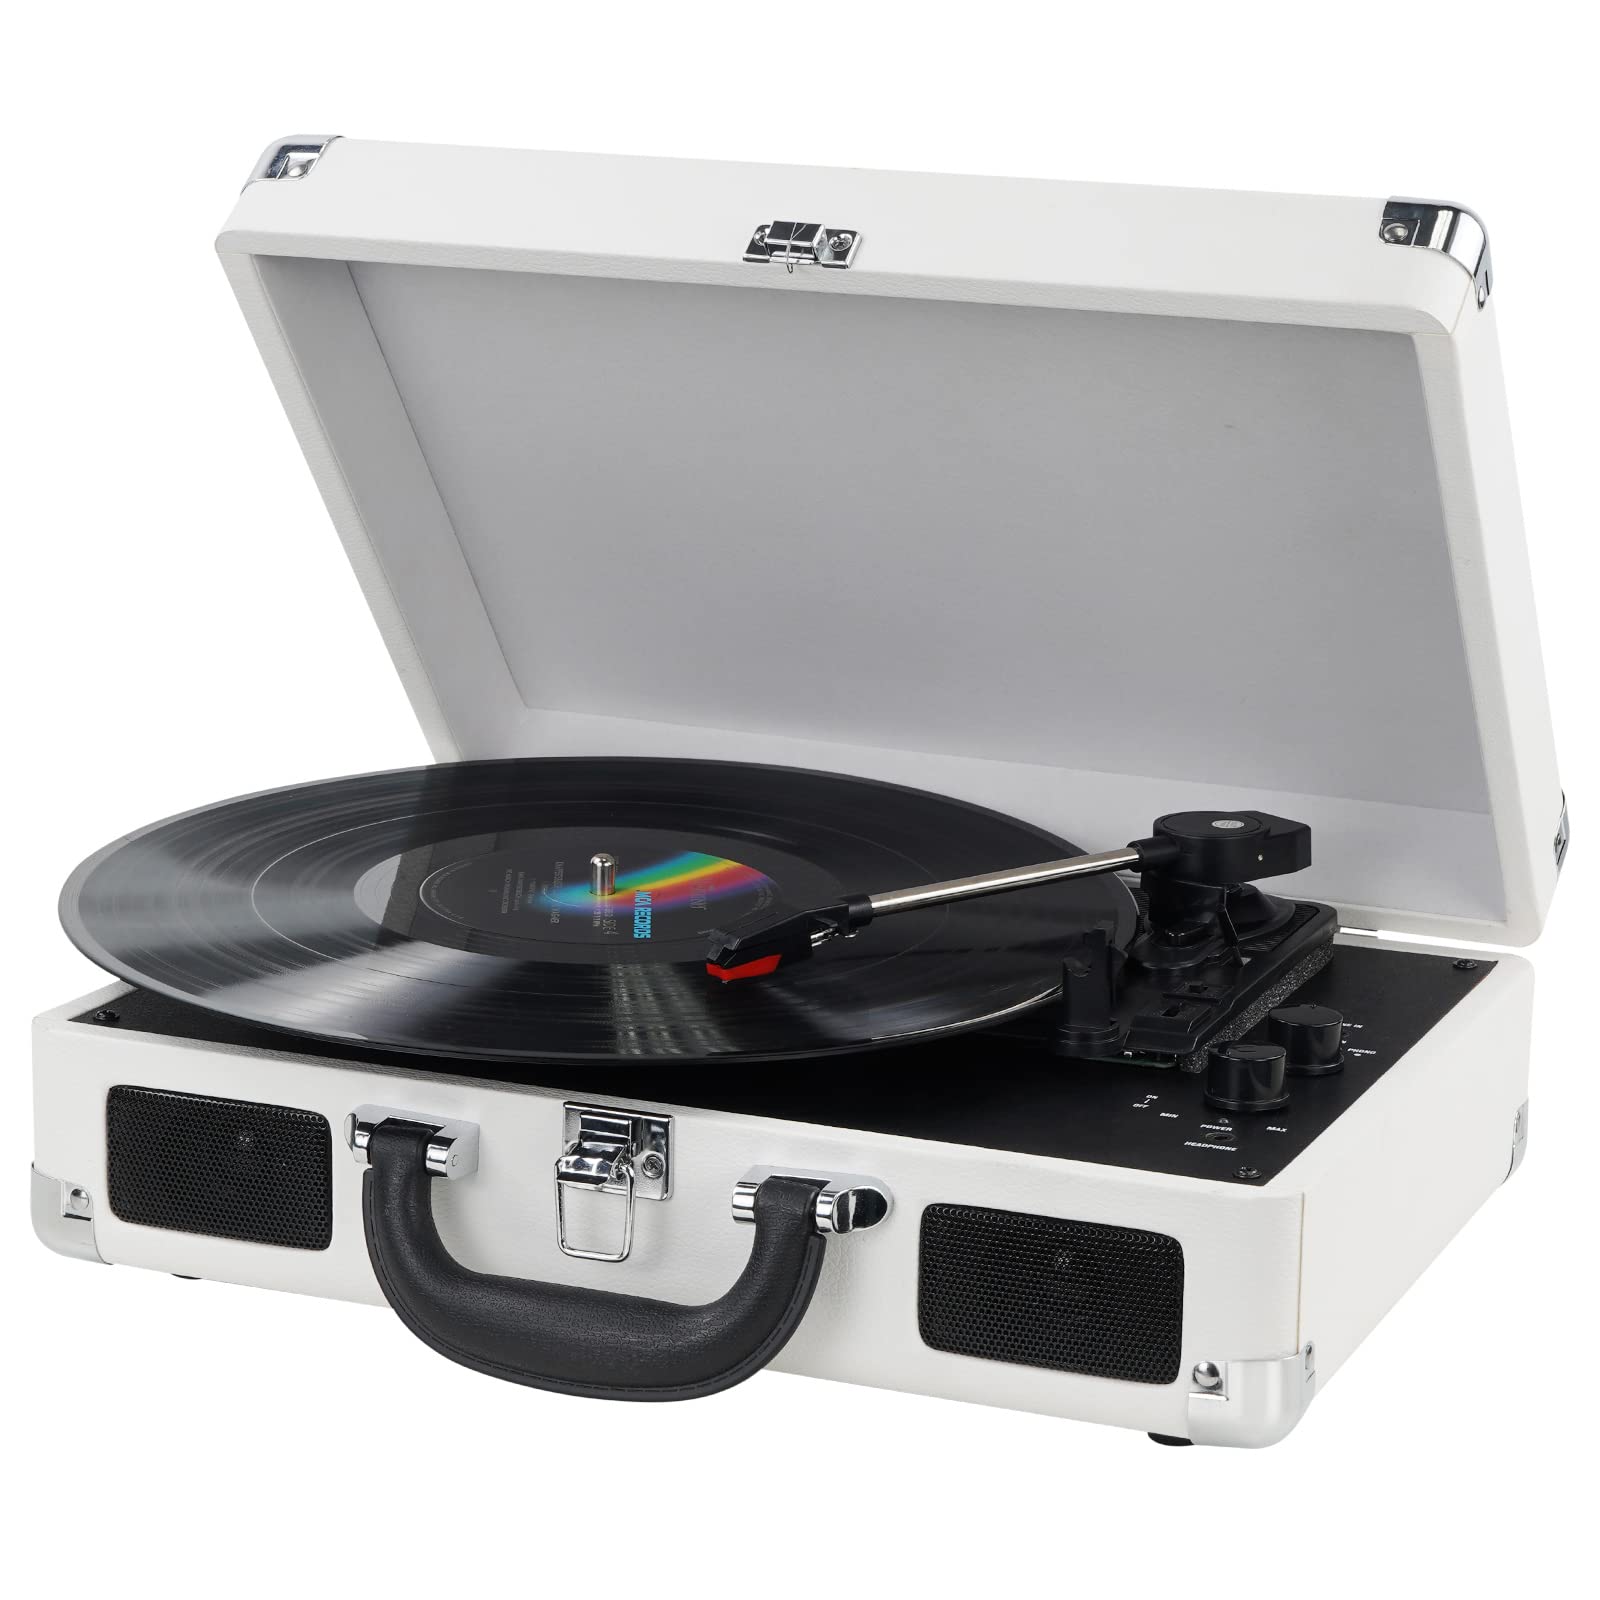 DIGITNOW Bluetooth Record Player with Stereo Speakers, Turntable for Vinyl  to 889743320329